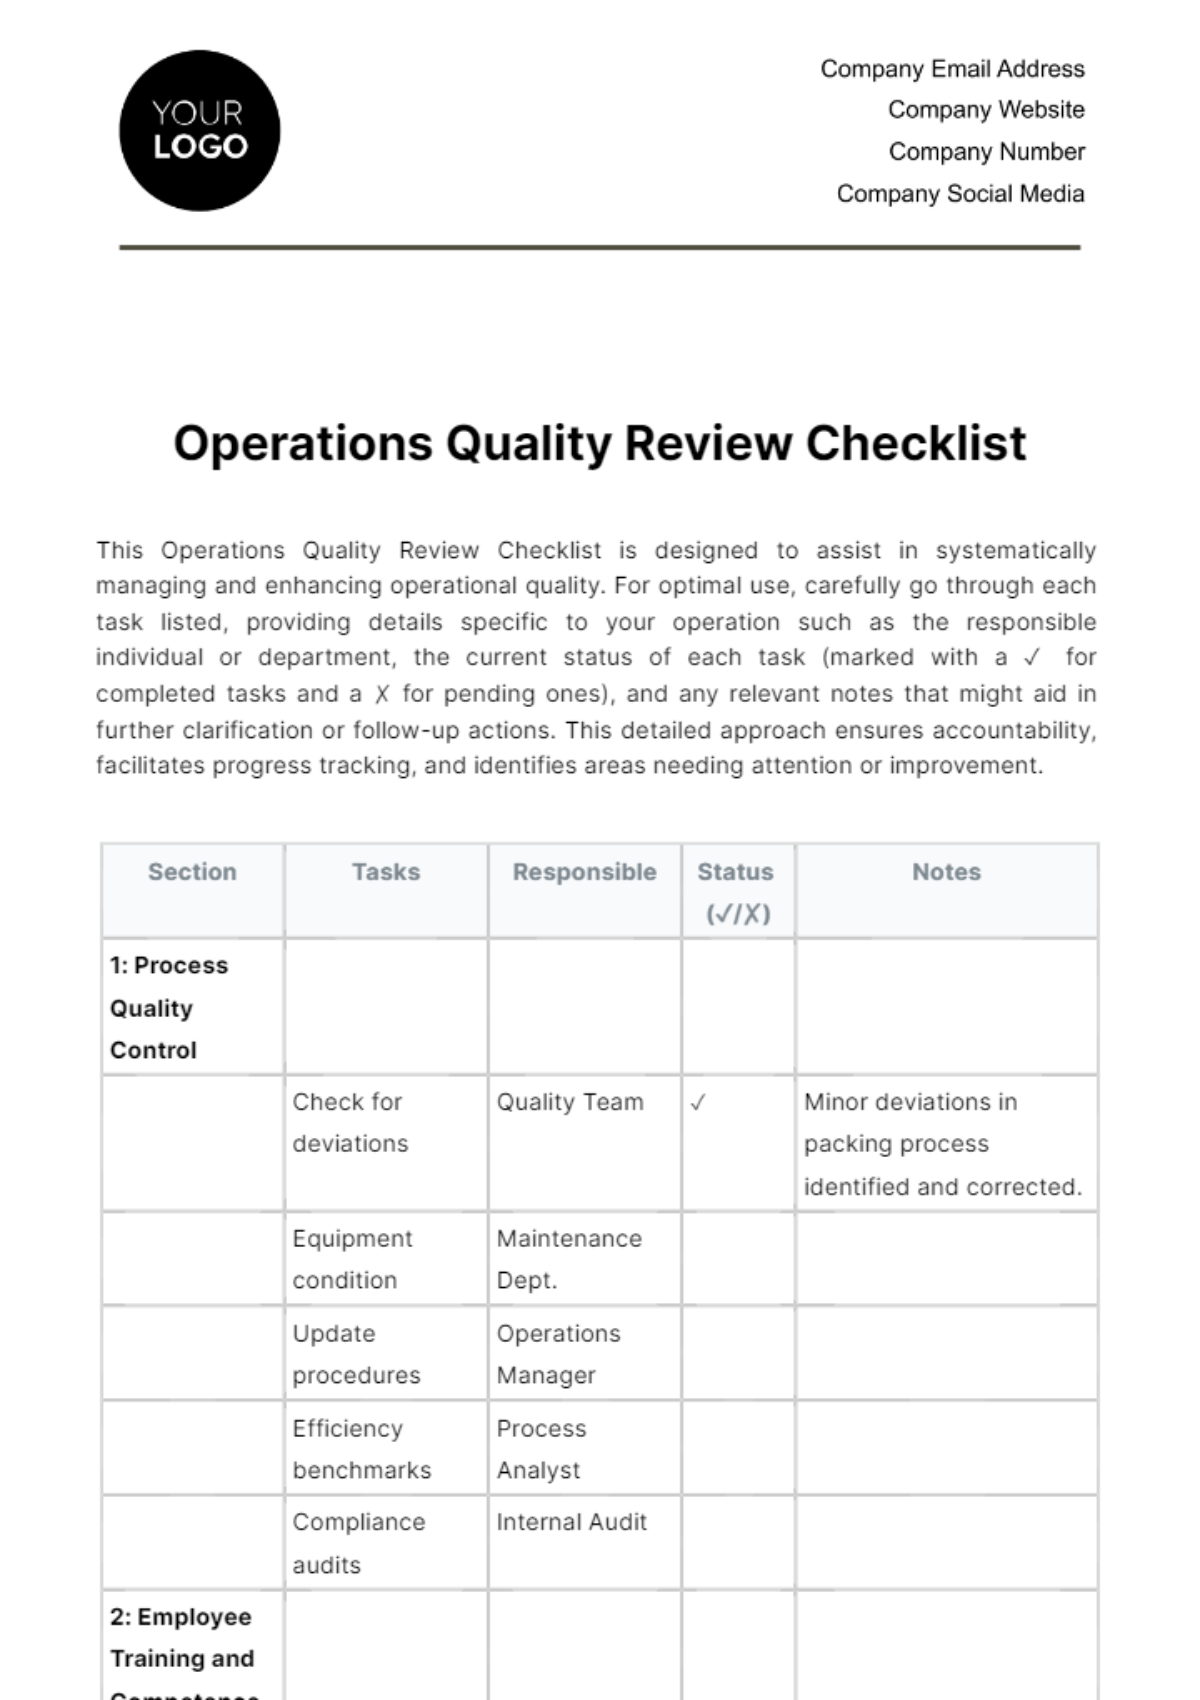 Operations Quality Review Checklist Template